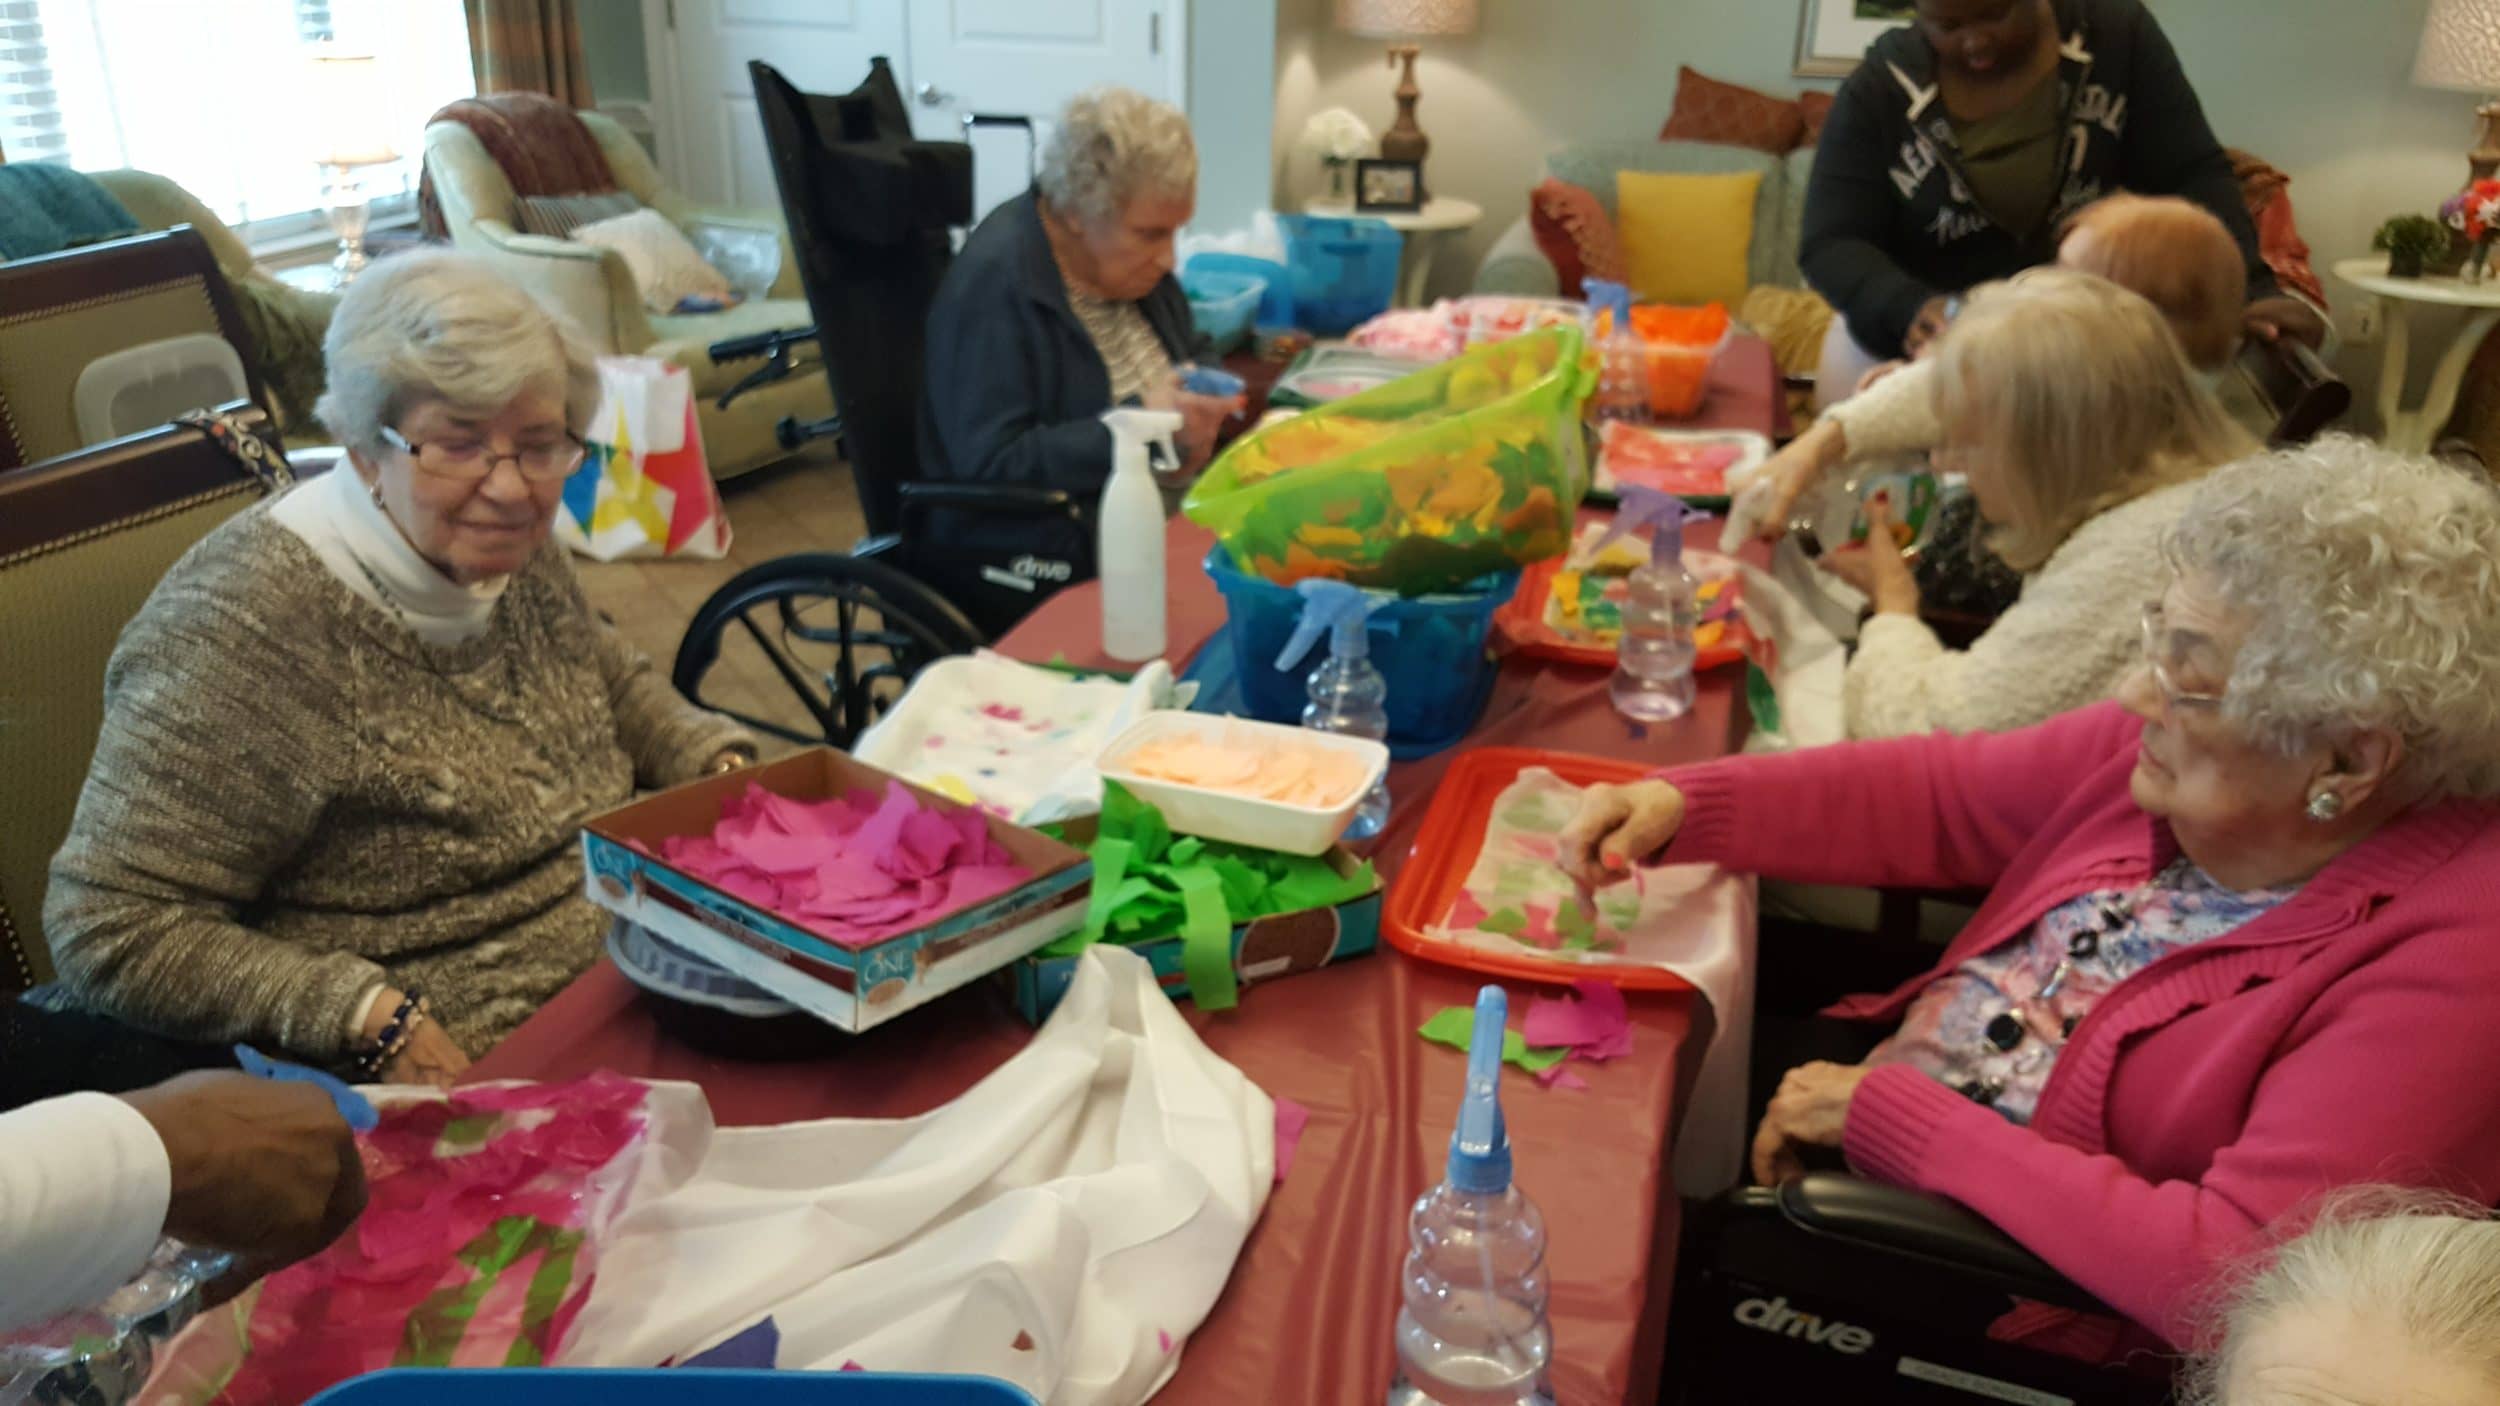 Kensington White Plains residents create scarves during Art Therapy